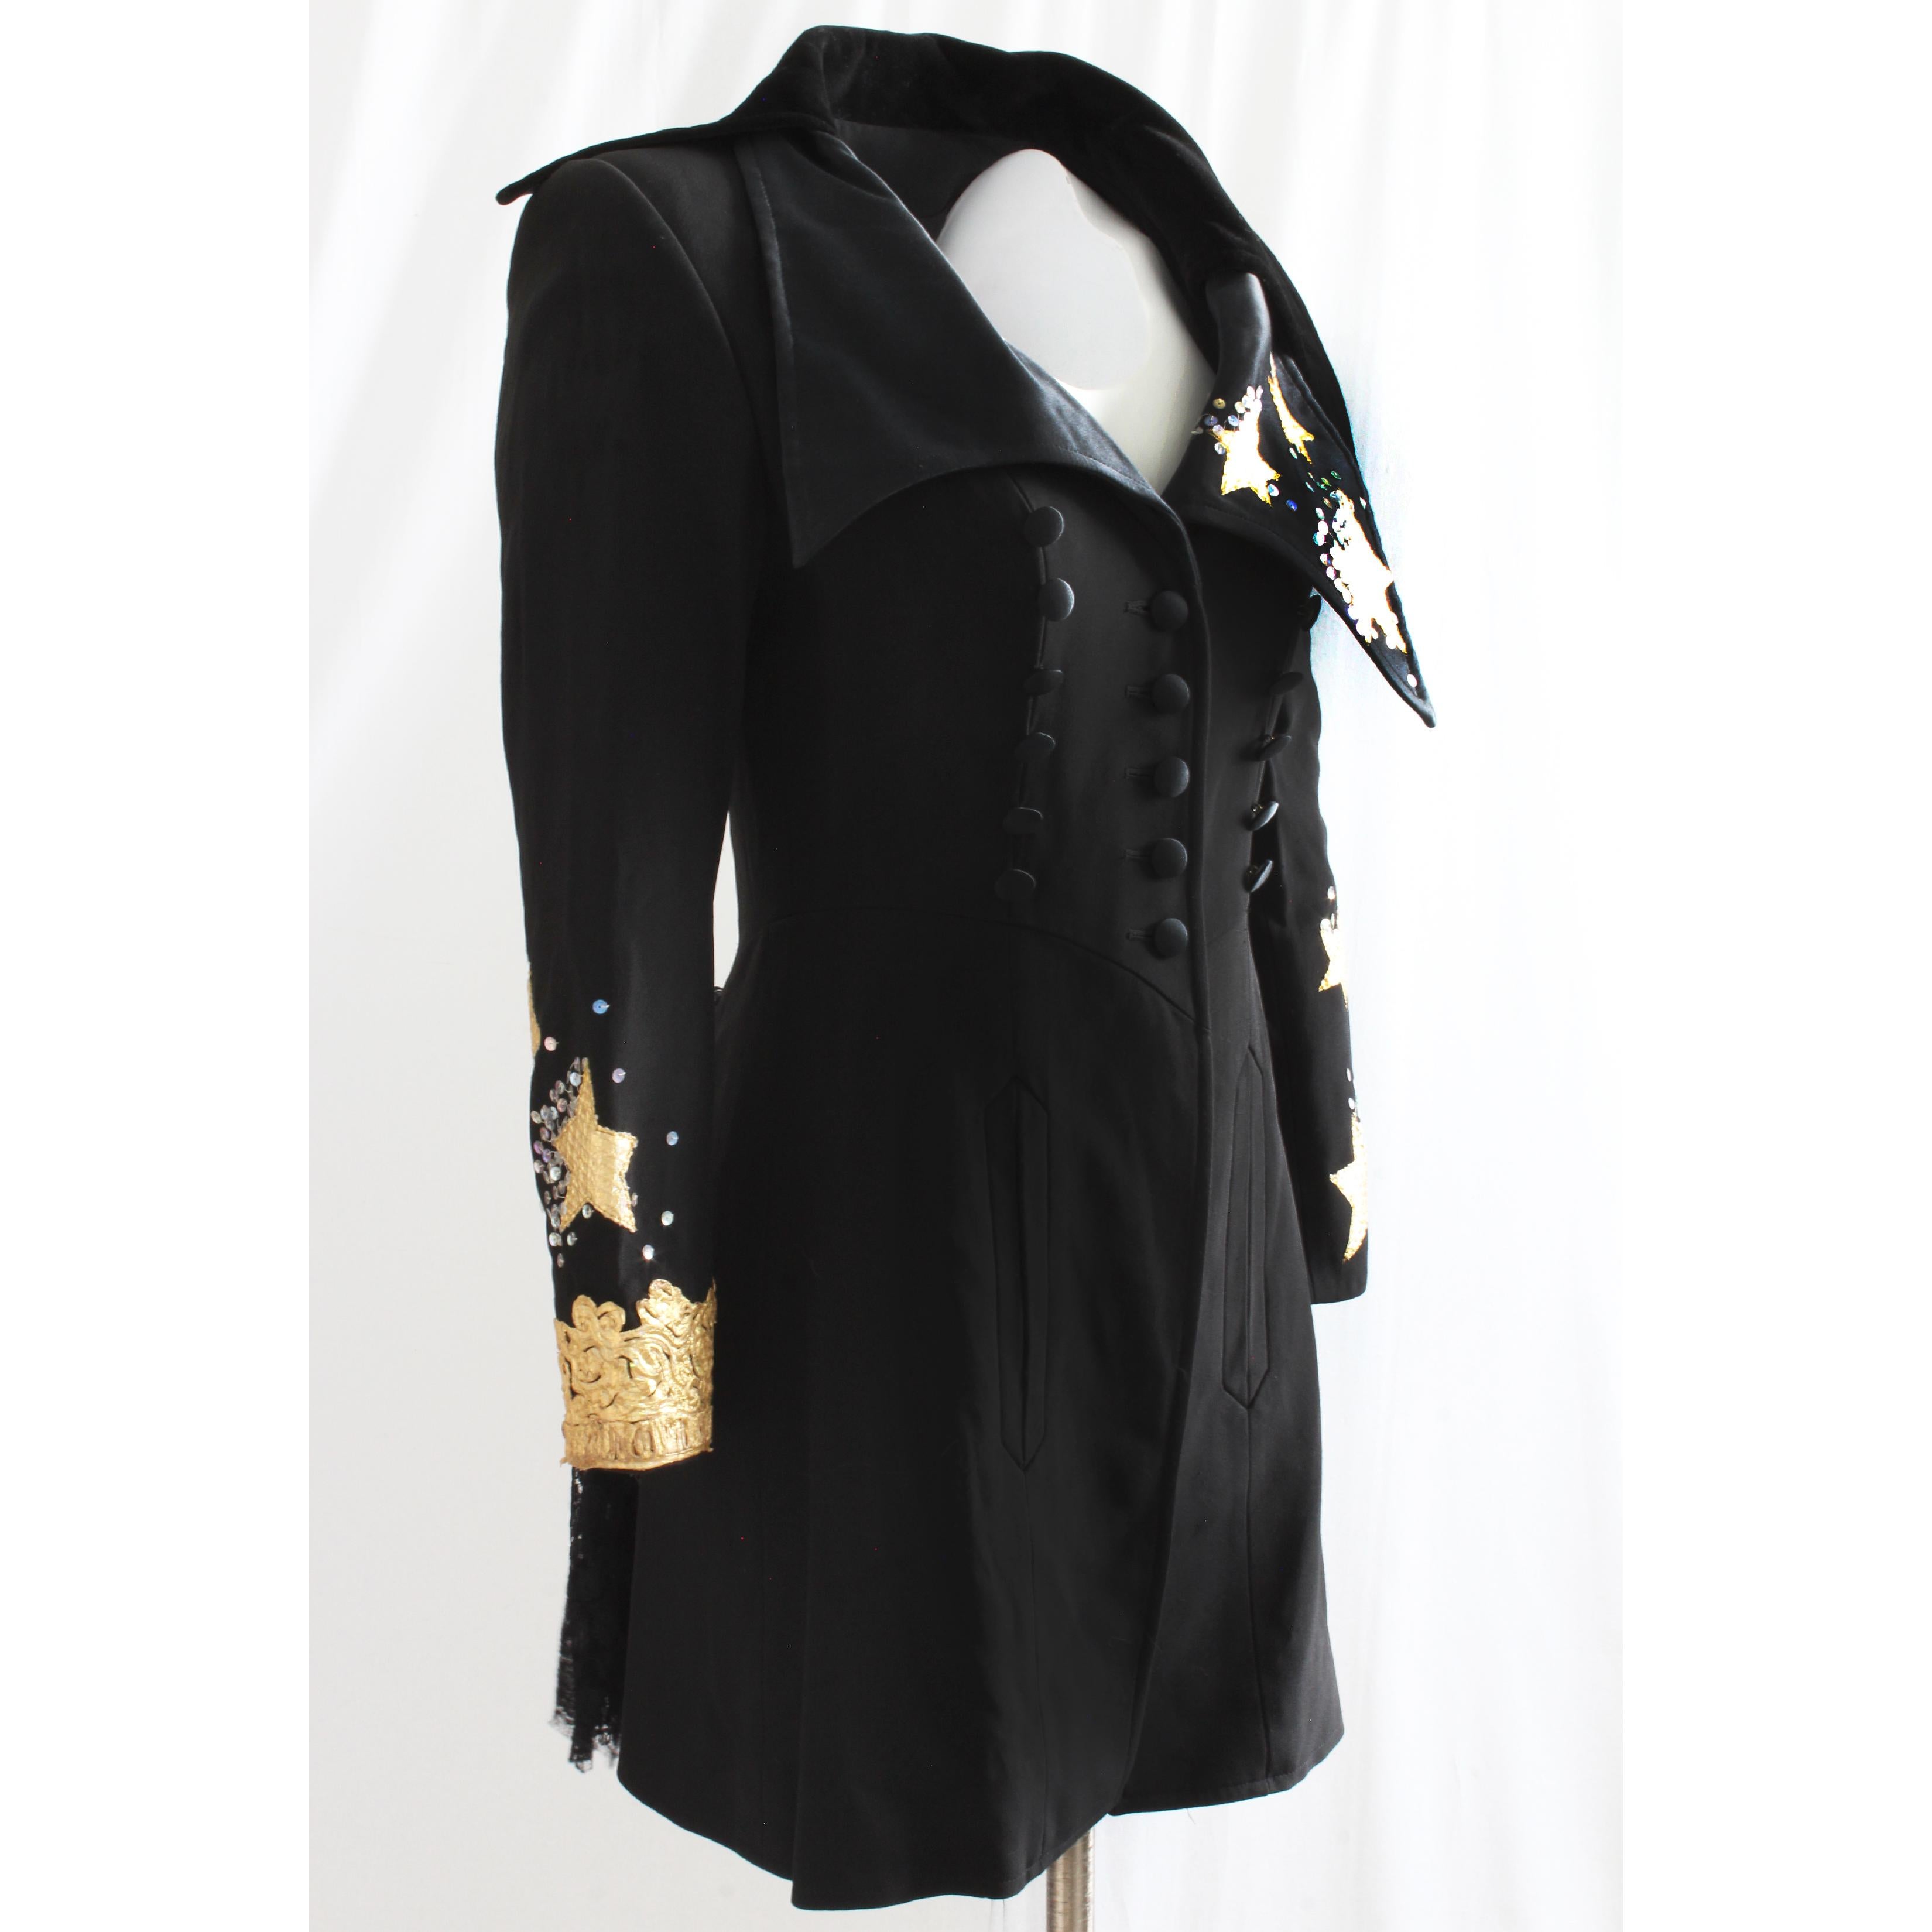 This fabulous long structured jacket was designed by Christian Lacroix, most likely in the early 90s. Made from a viscose blend garbardine, the large lapel collar is made from black velvet and features snakeskin embroidery stars, gold embroidery